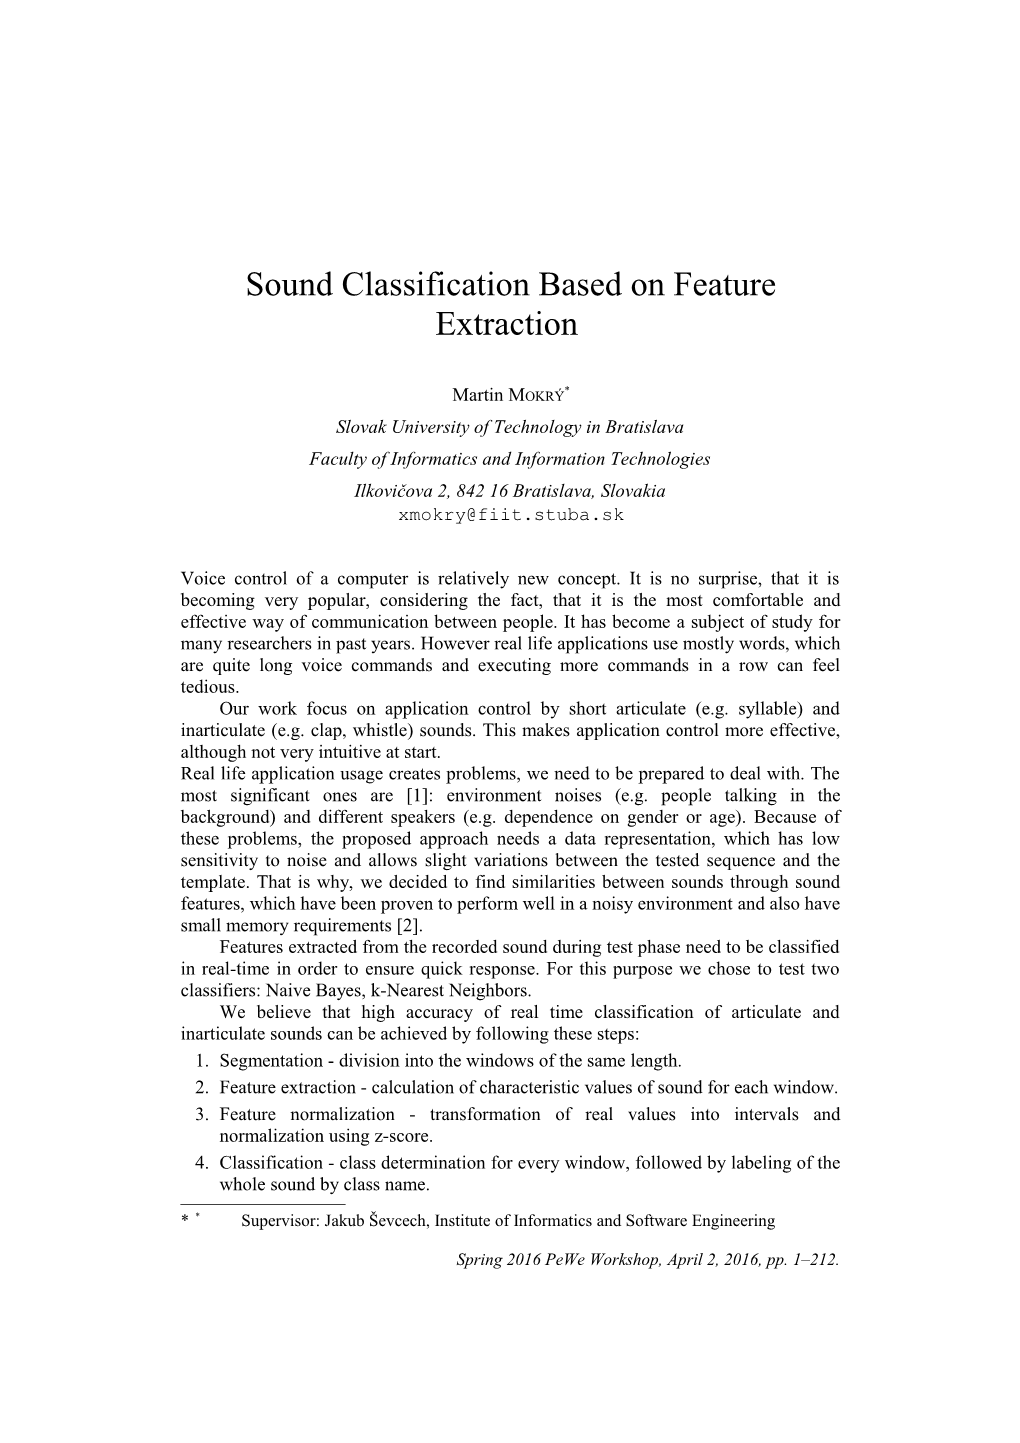 Sound Classification Based on Feature Extraction1